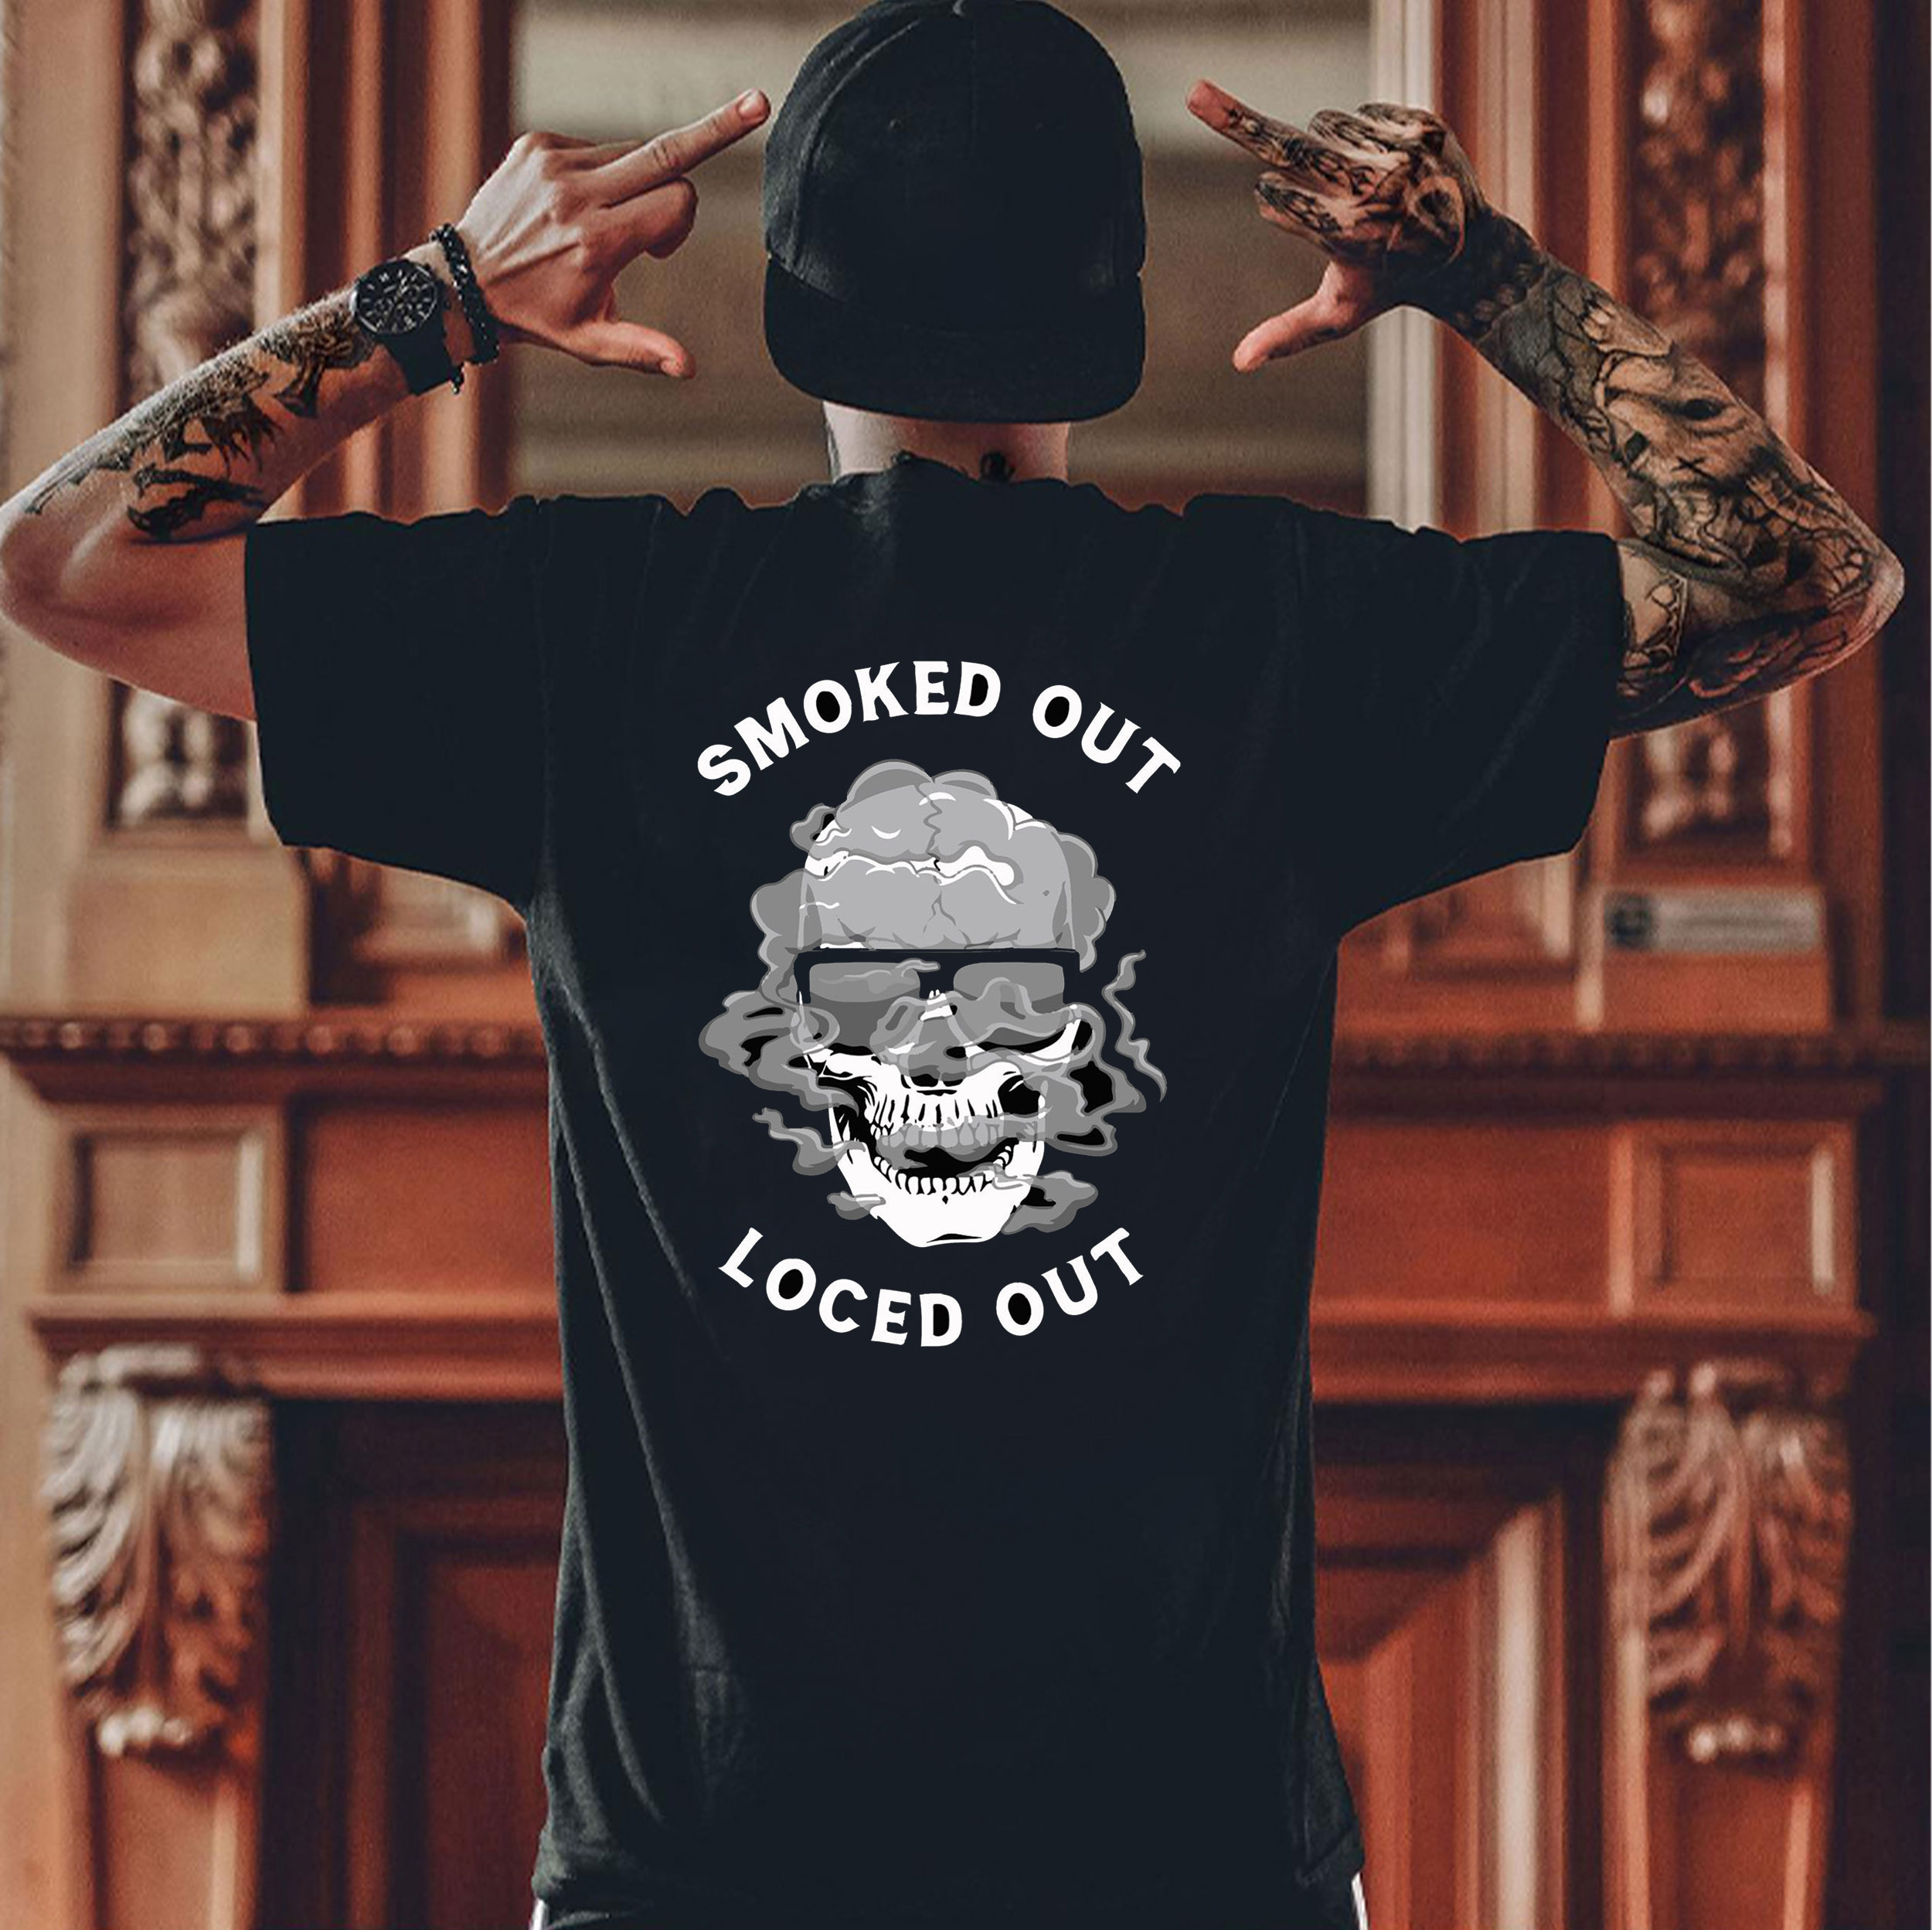 SMOKED OUT LOCED OUT Skull Black Print T-Shirt